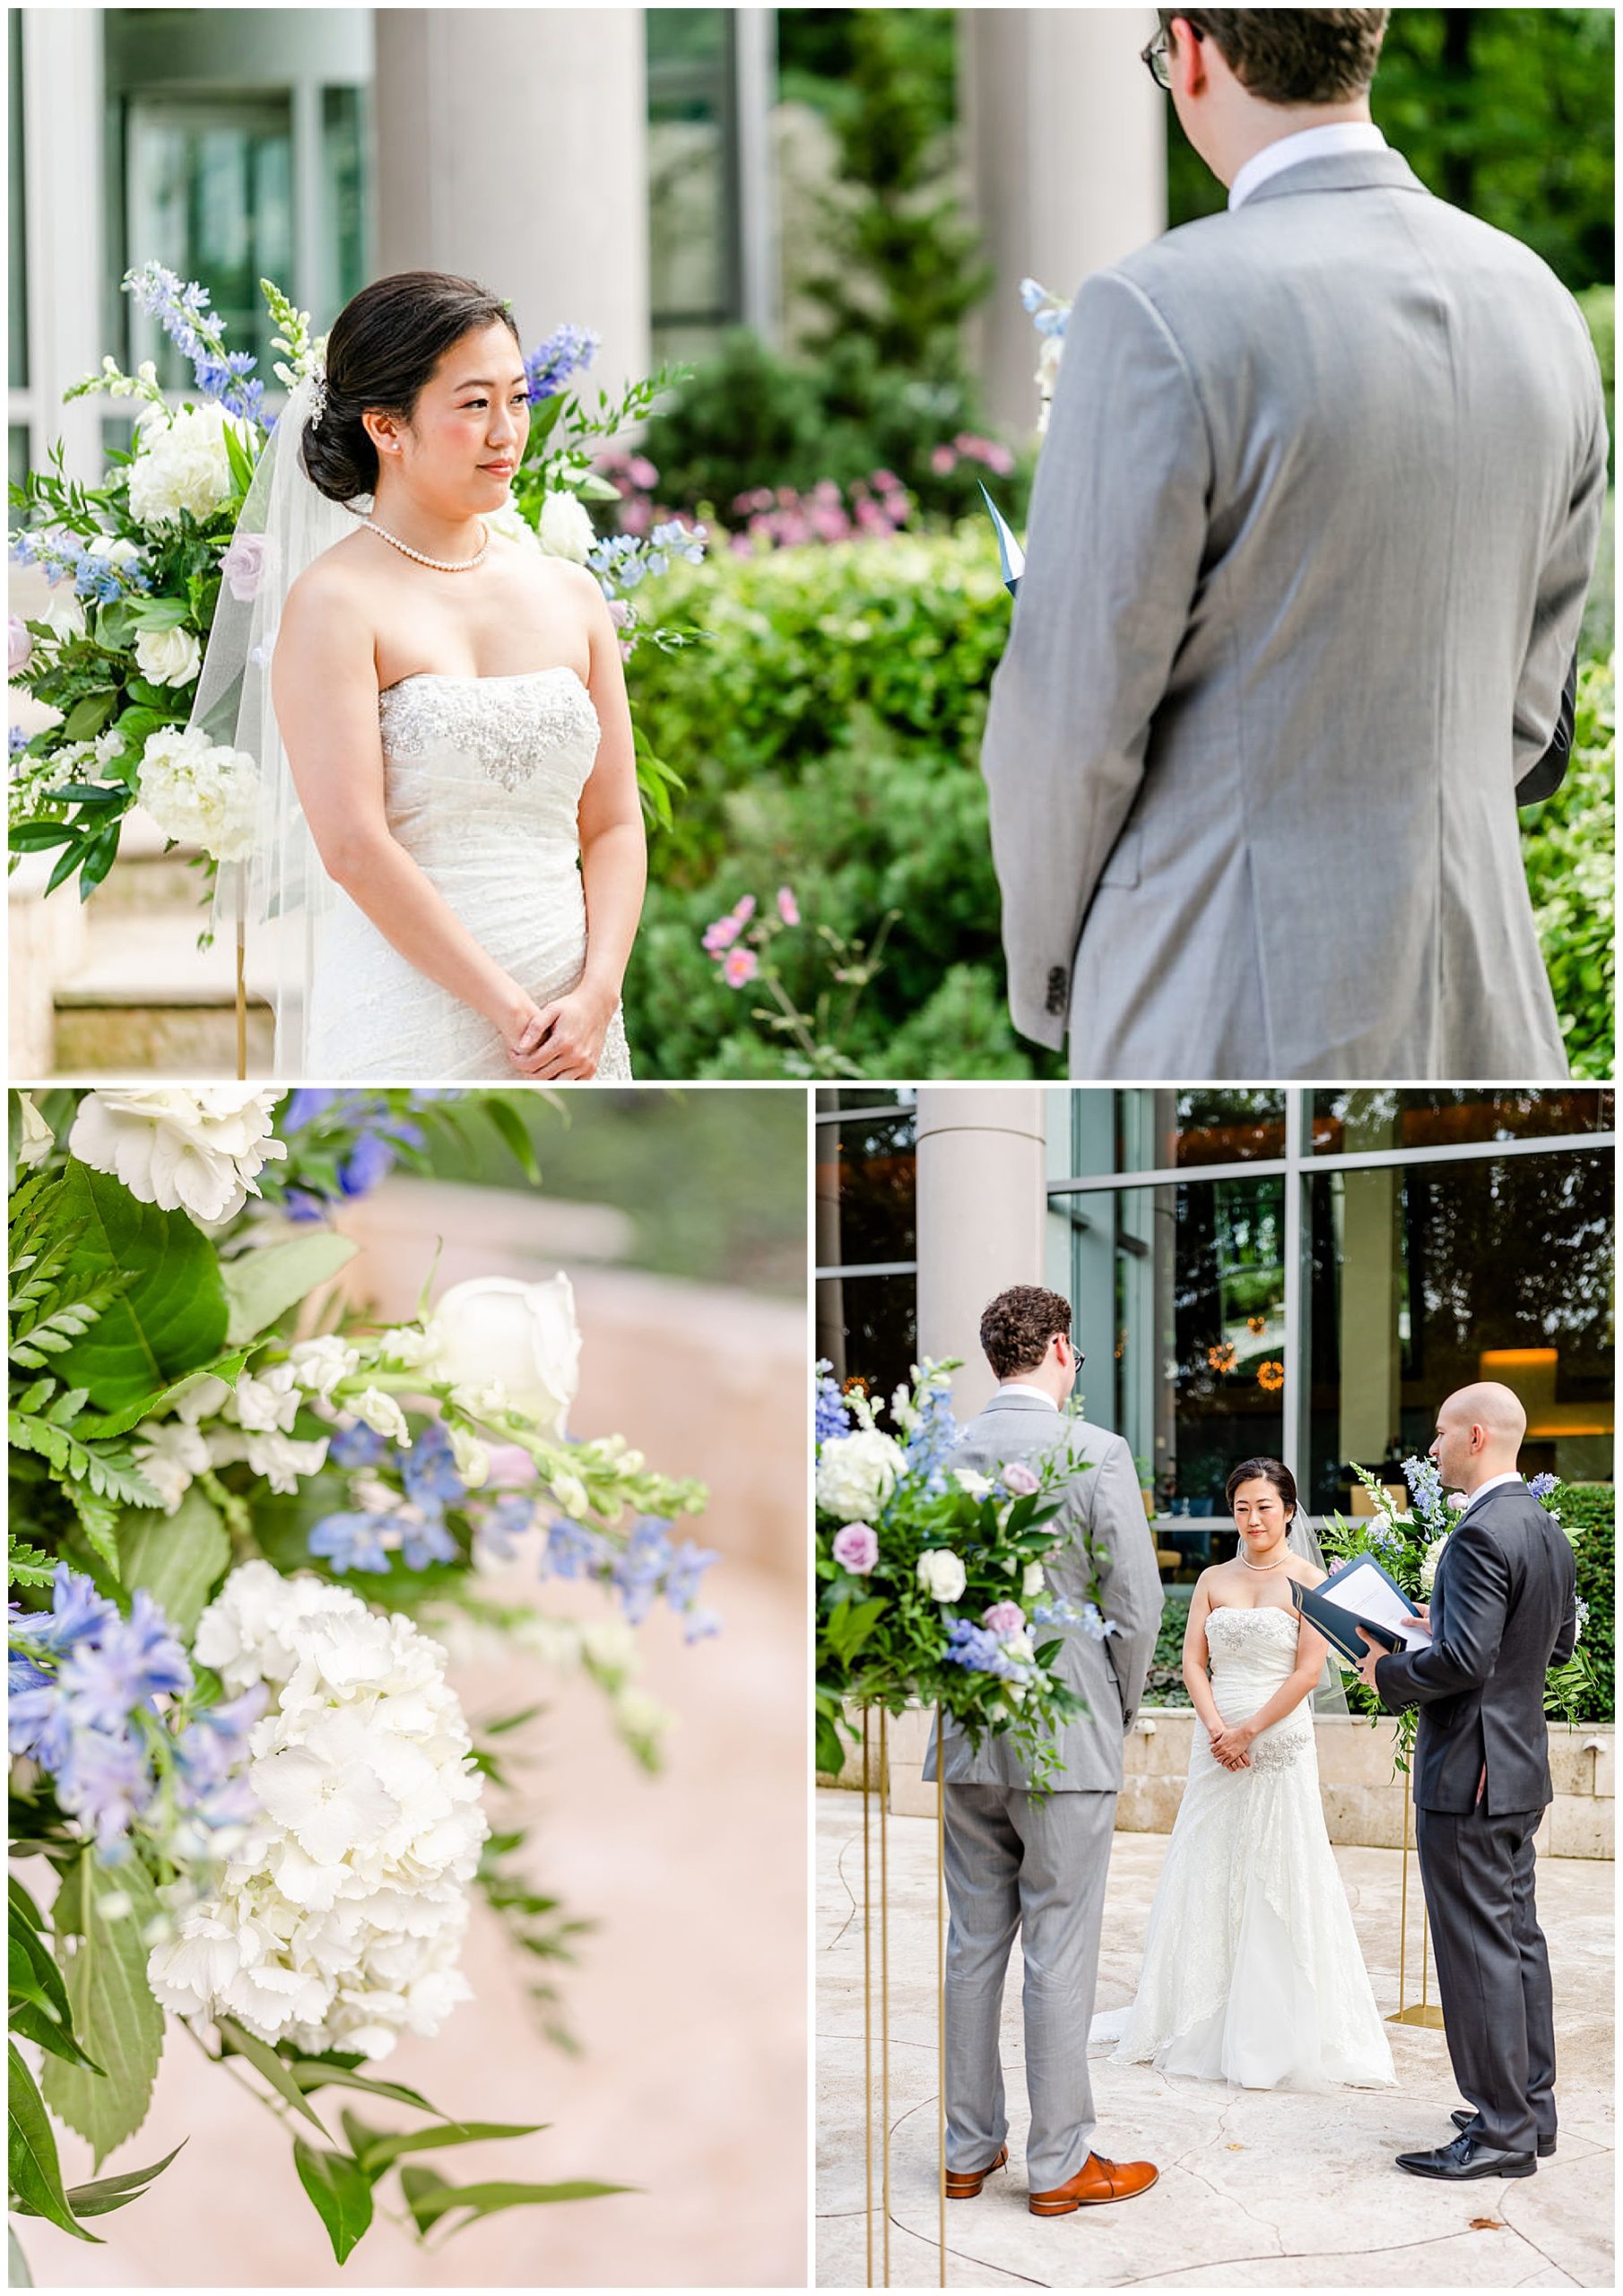 sunrise and sunset DC wedding, DC wedding photos, DC wedding portraits, micro-wedding, DC micro-wedding photography, DC micro-wedding photographer, DC petite wedding photographer, northern Virginia wedding photography, natural light wedding photography, unique wedding, Rachel E.H. Photography, couple at alter, bride standing at alter, blue and white flowers, hair and makeup by Carolyn Thombs Artistry